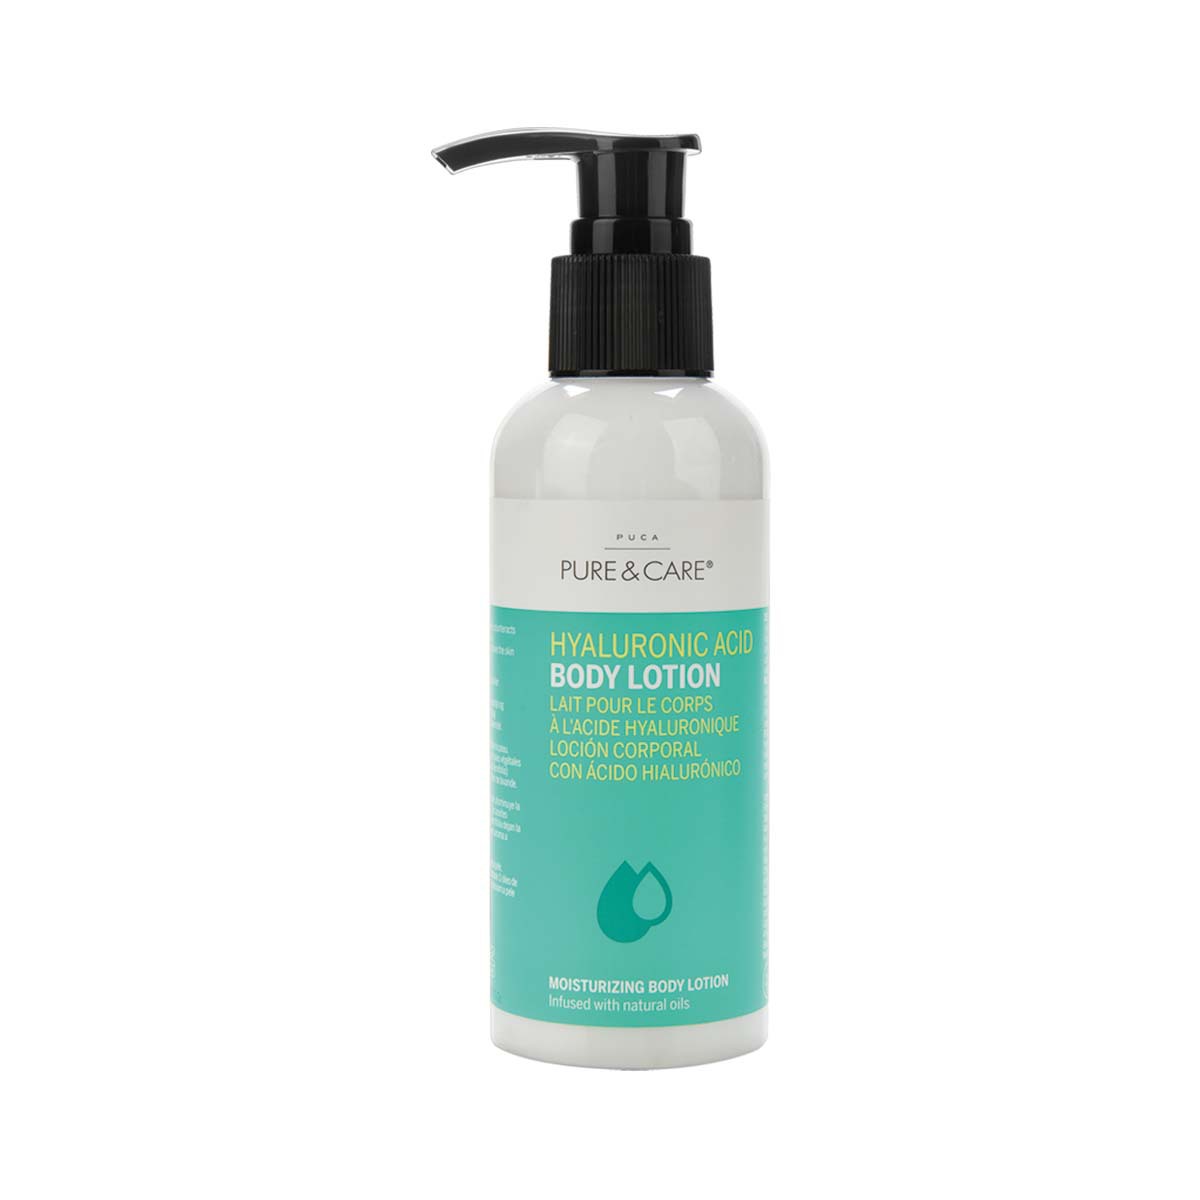 Hyaluronic Acid body Lotion | PUCA - PURE and CARE